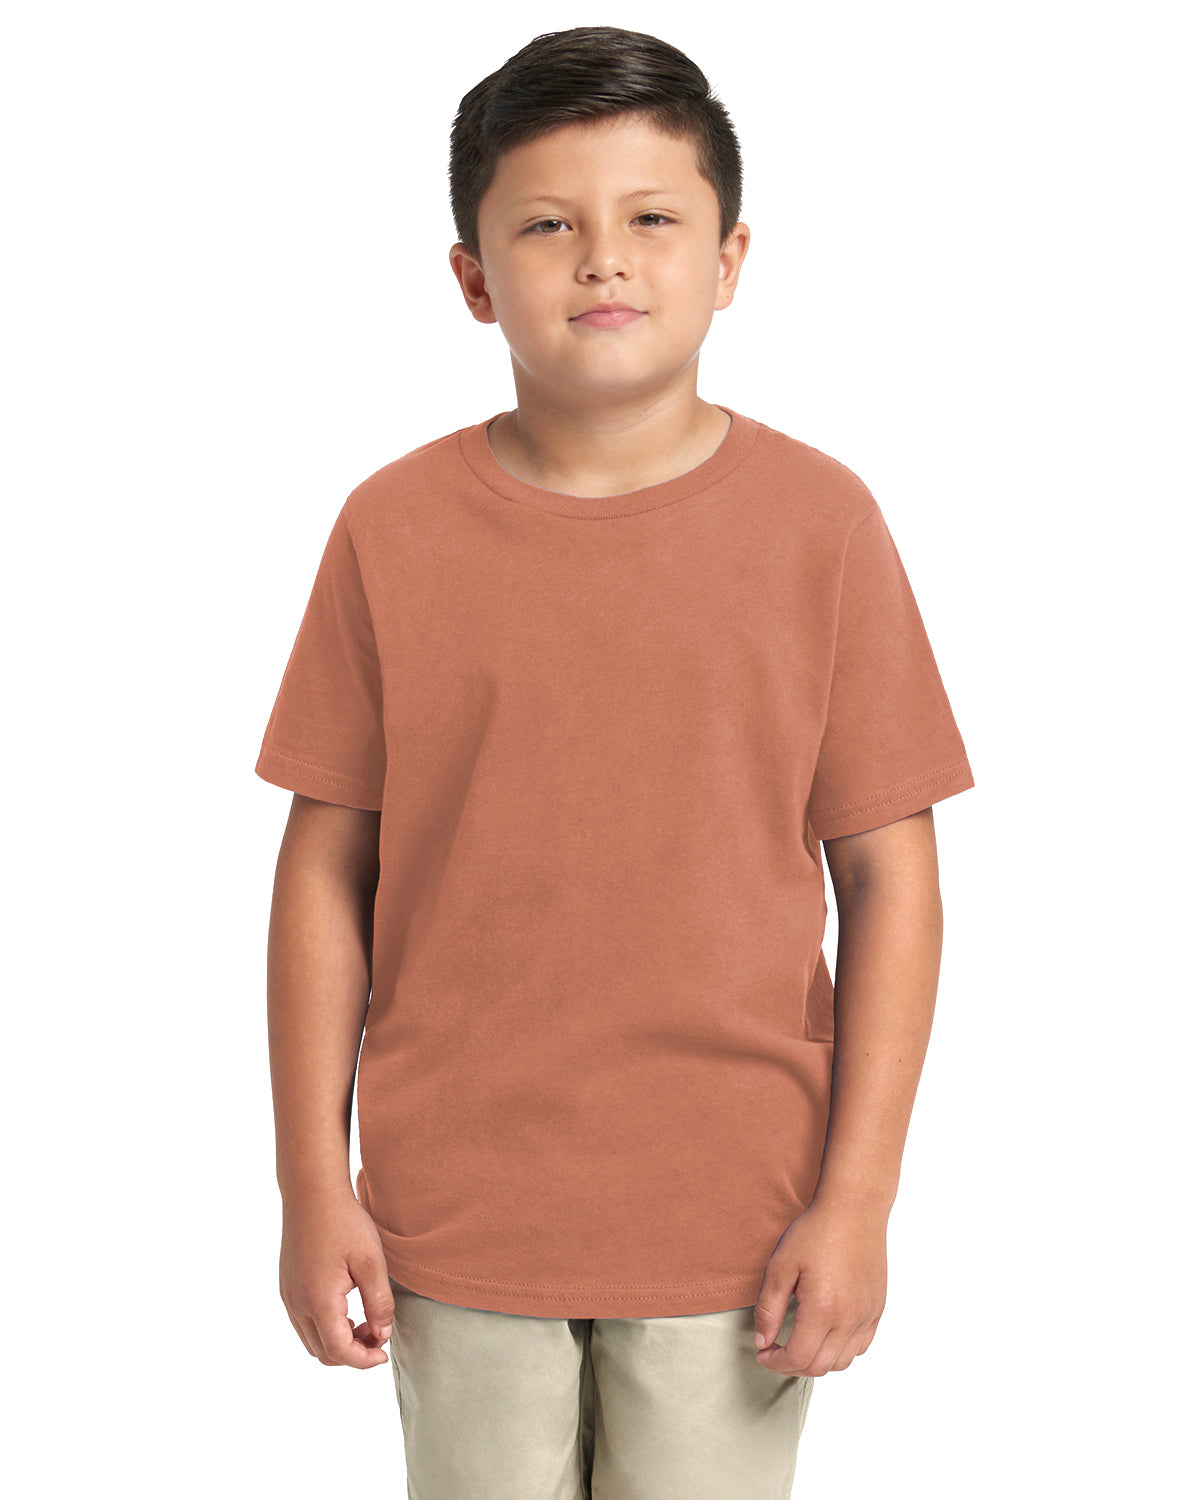 child model wearing next level youth tee in desert pink